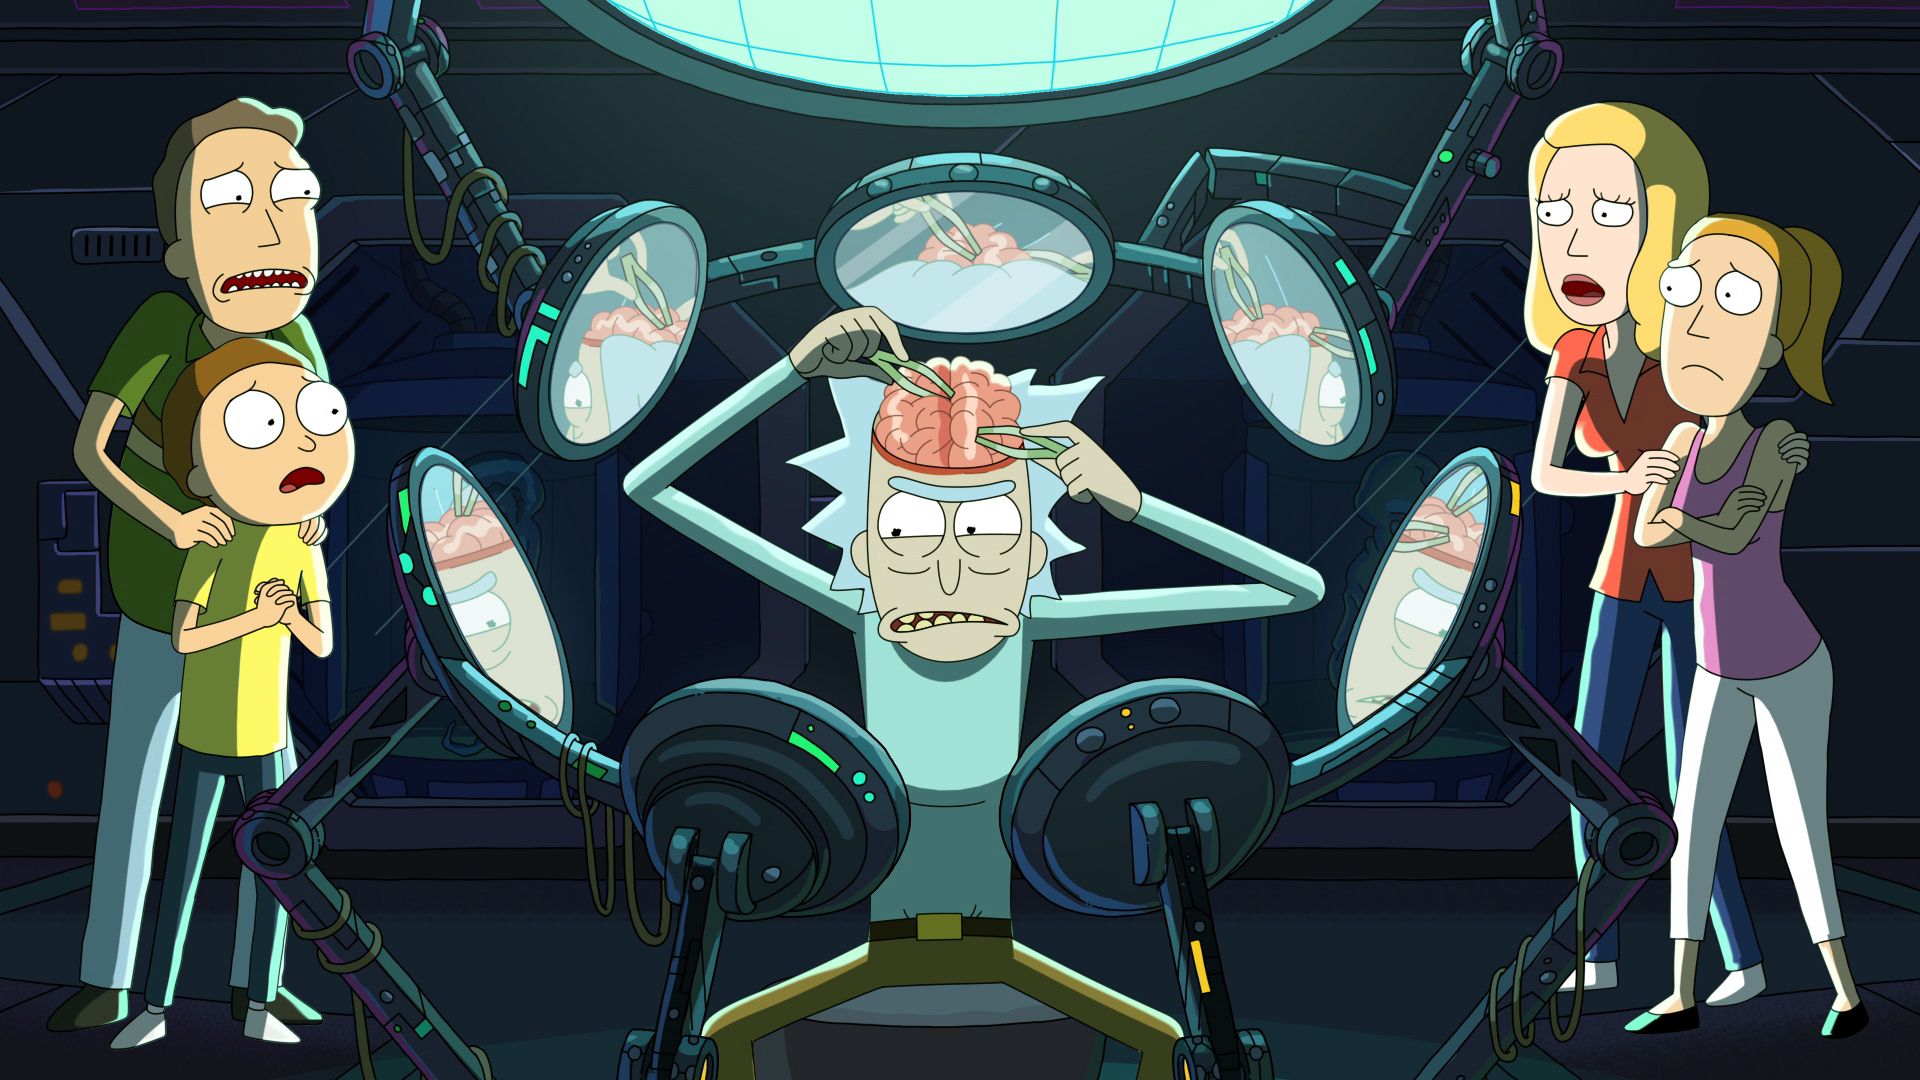 Rick And Morty Season 4 Episode 6 Characters - Management And Leadership